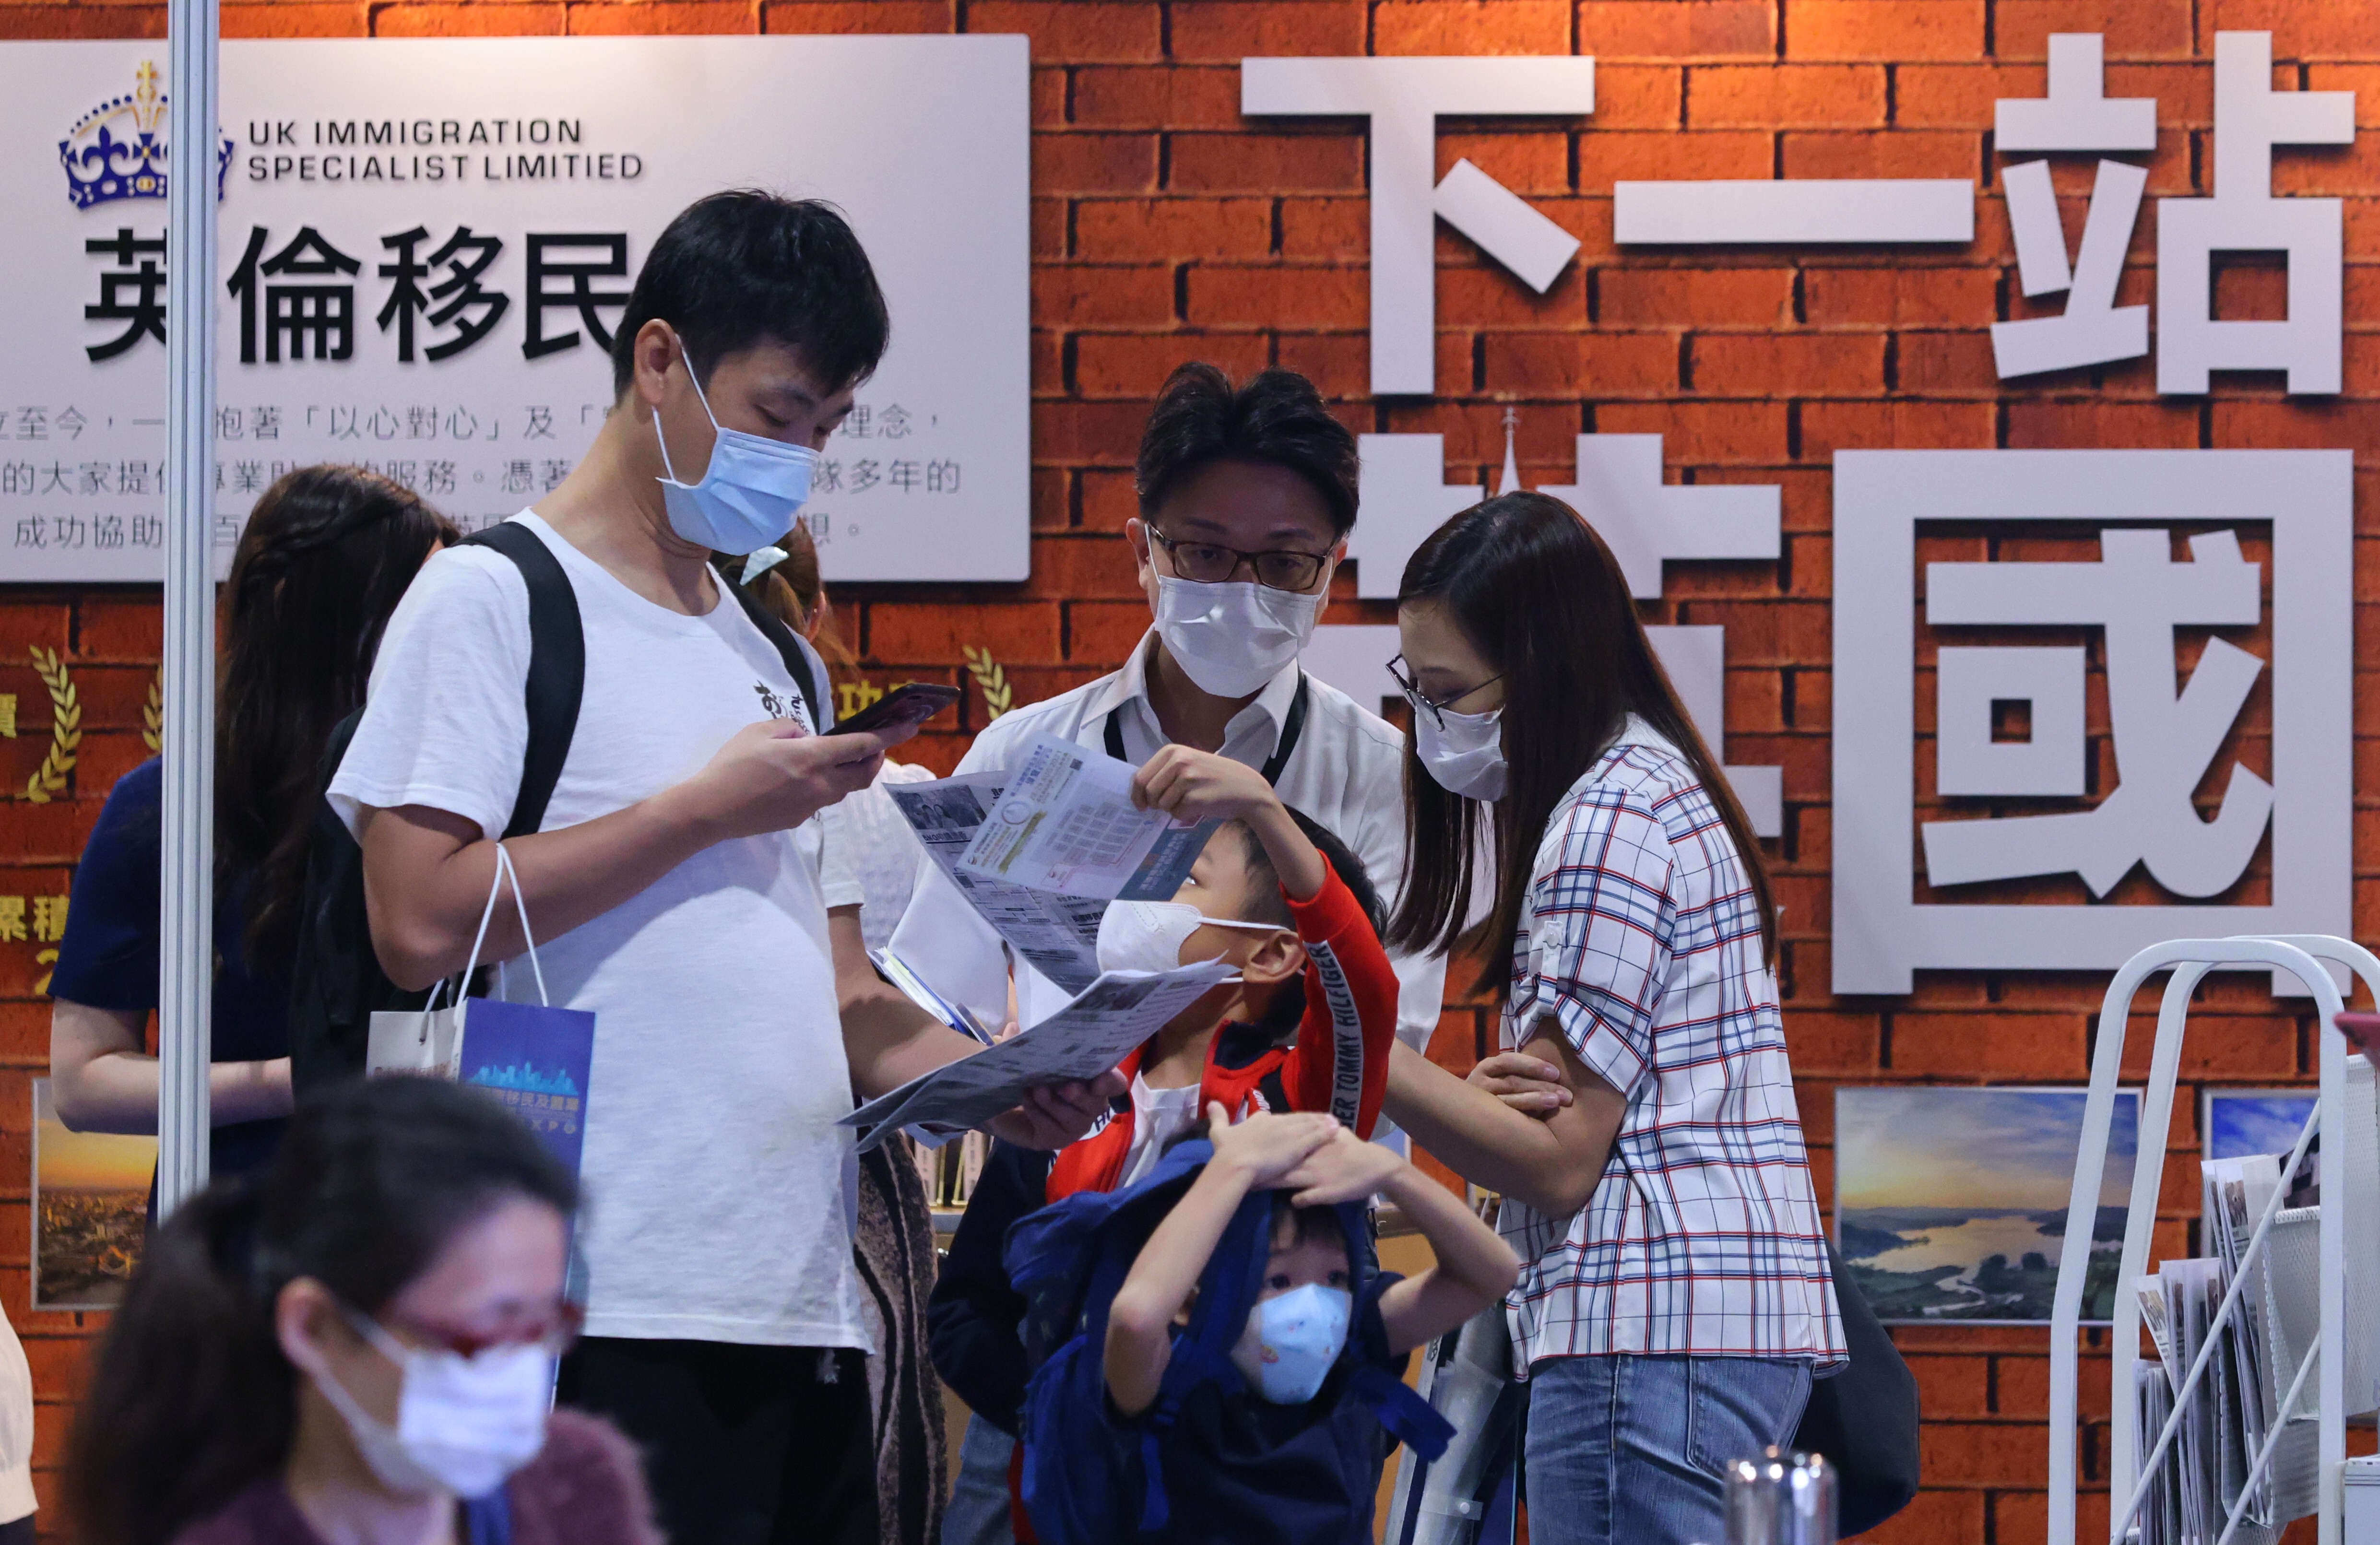 Attendees at the 2nd International Immigration and Property Expo at the Hong Kong Convention and Exhibition Centre (HKCEC) in Wan Chai on 29 August 2021. Photo: Dickson Lee.